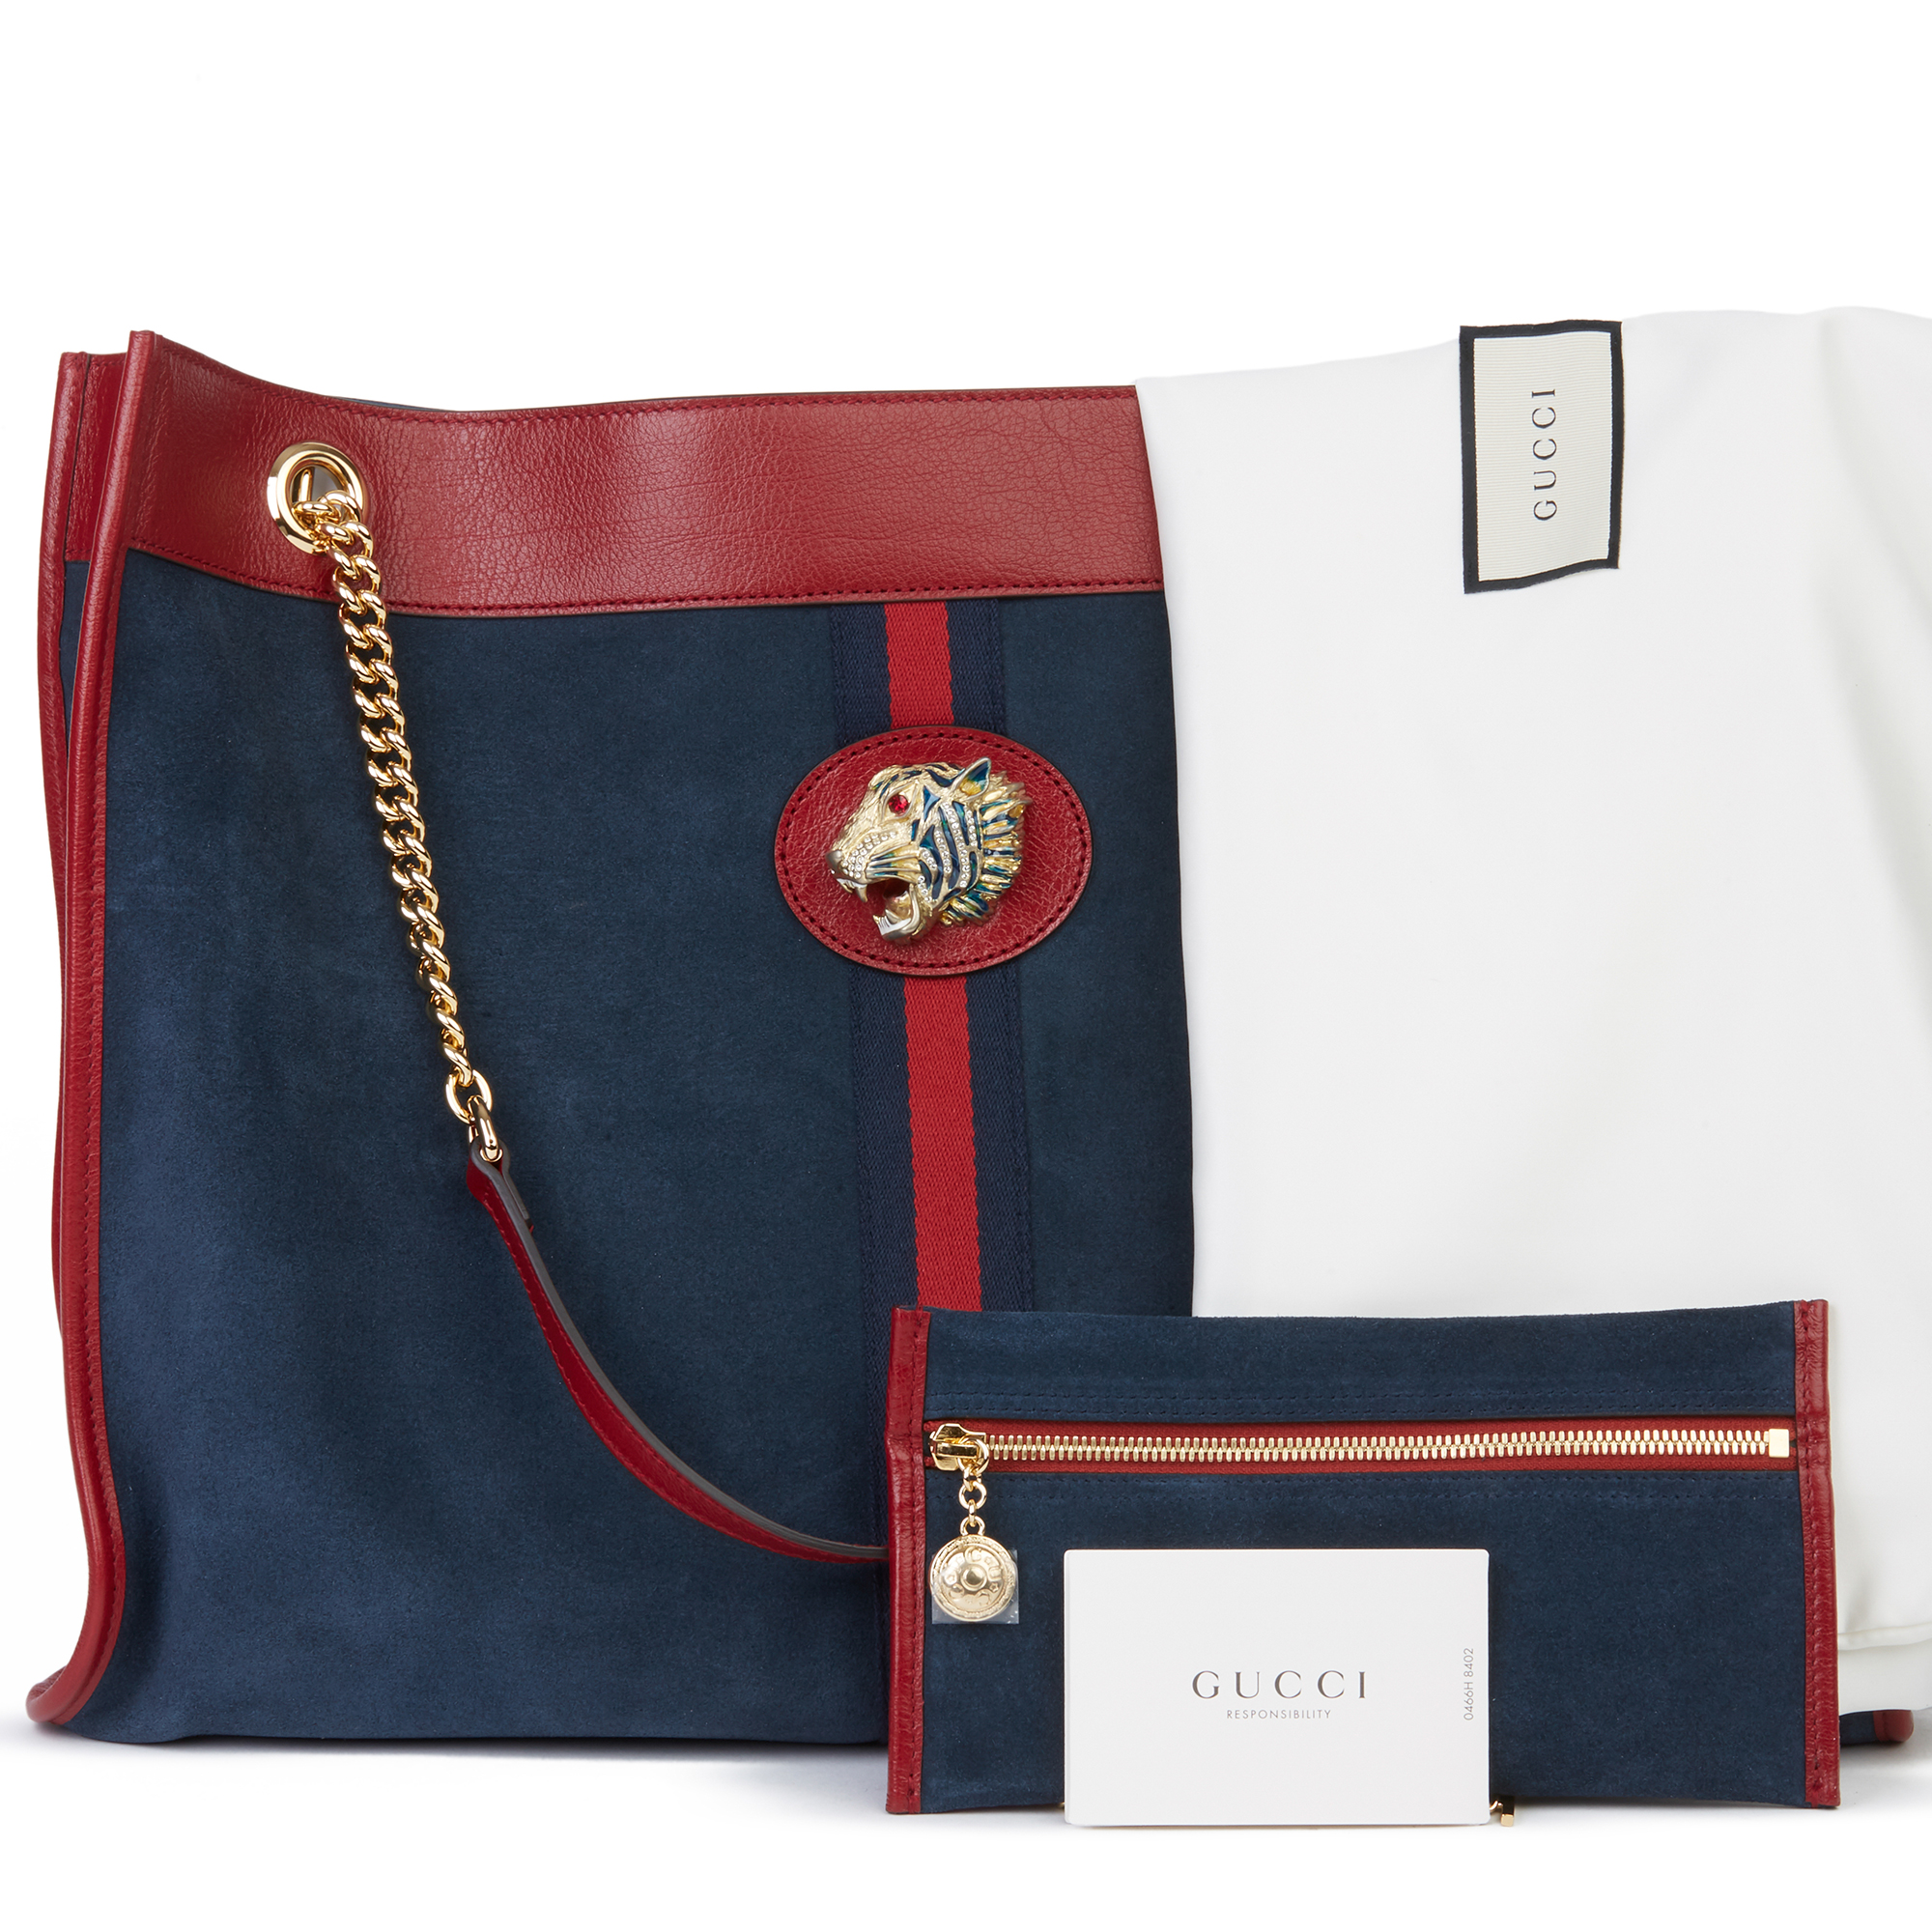 Gucci Red Aged Calfskin Leather & Blue Suede Web Large Rajah Tote - Image 3 of 12